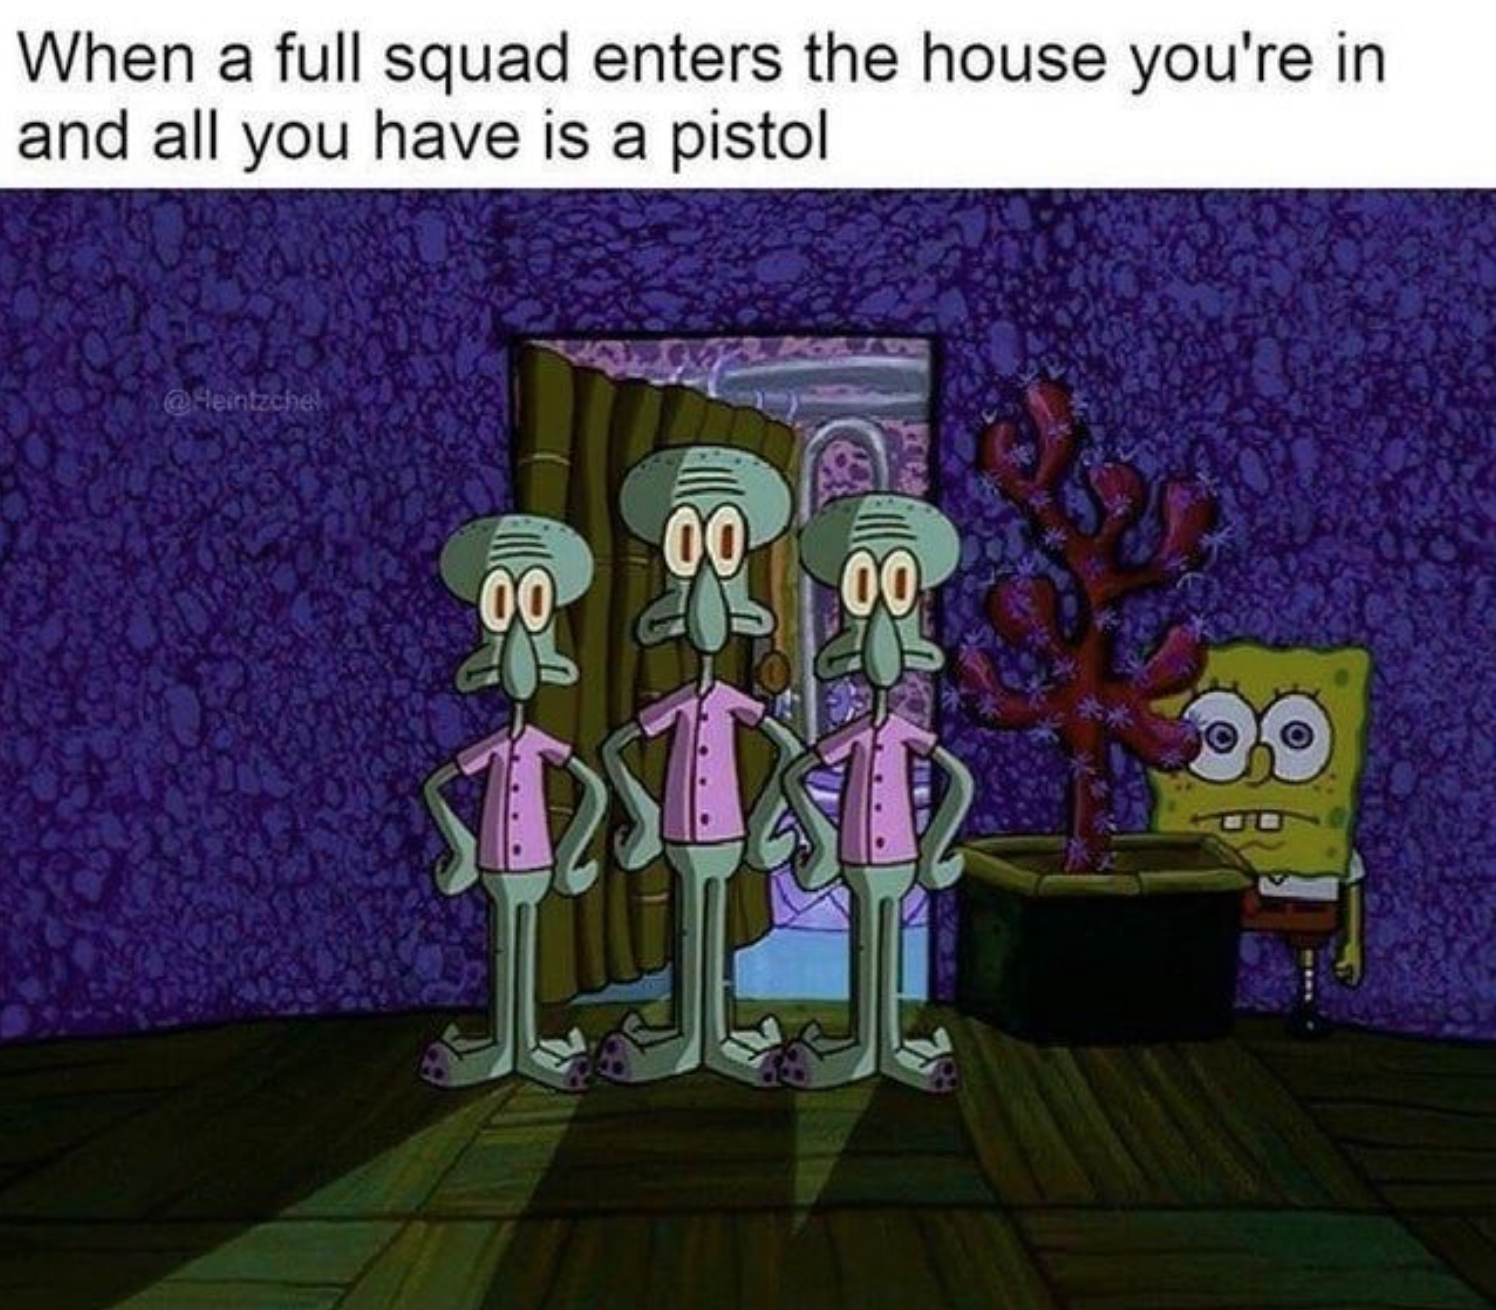 funny gaming memes - spongebob yelling meme template - When a full squad enters the house you're in and all you have is a pistol Fetiche! 00 00 00